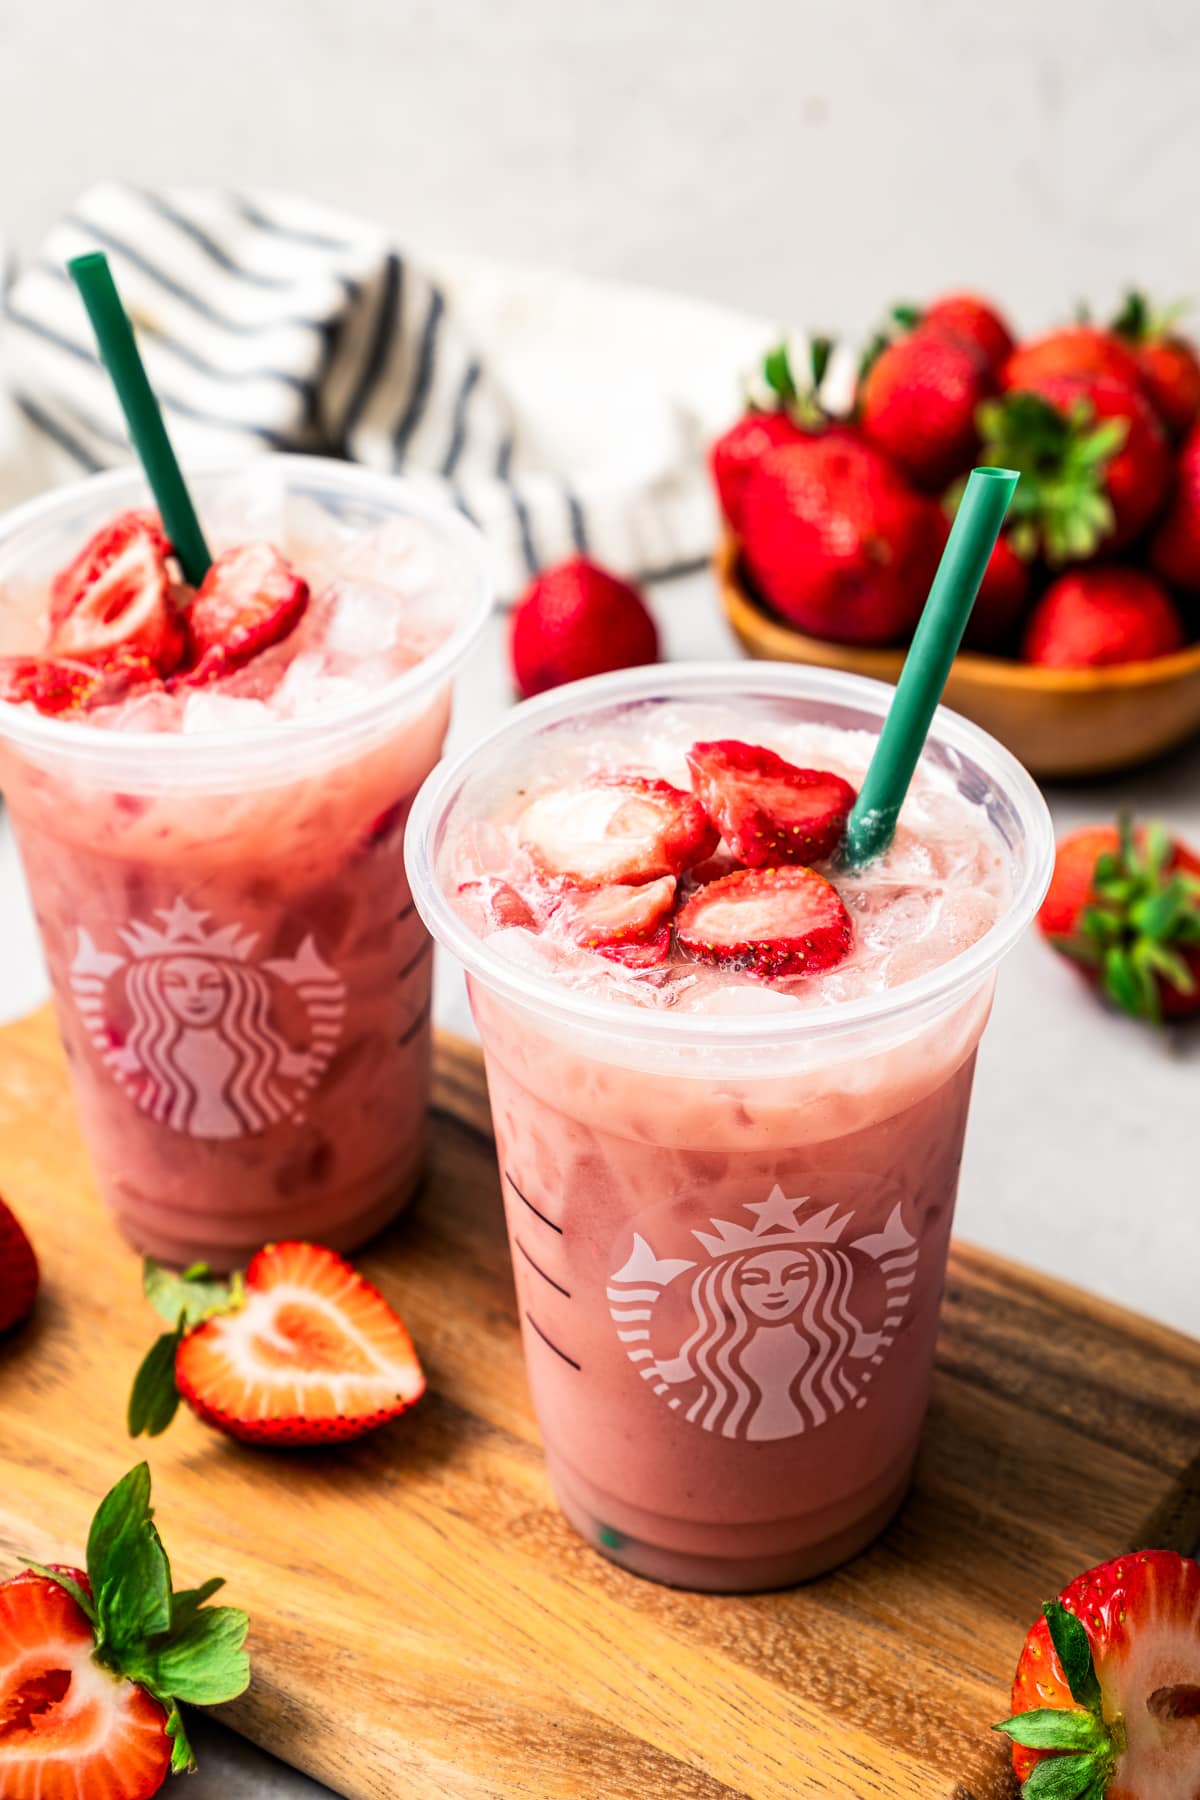 Homemade Starbucks pink drink in two plastic cups and garnished with dried strawberries.